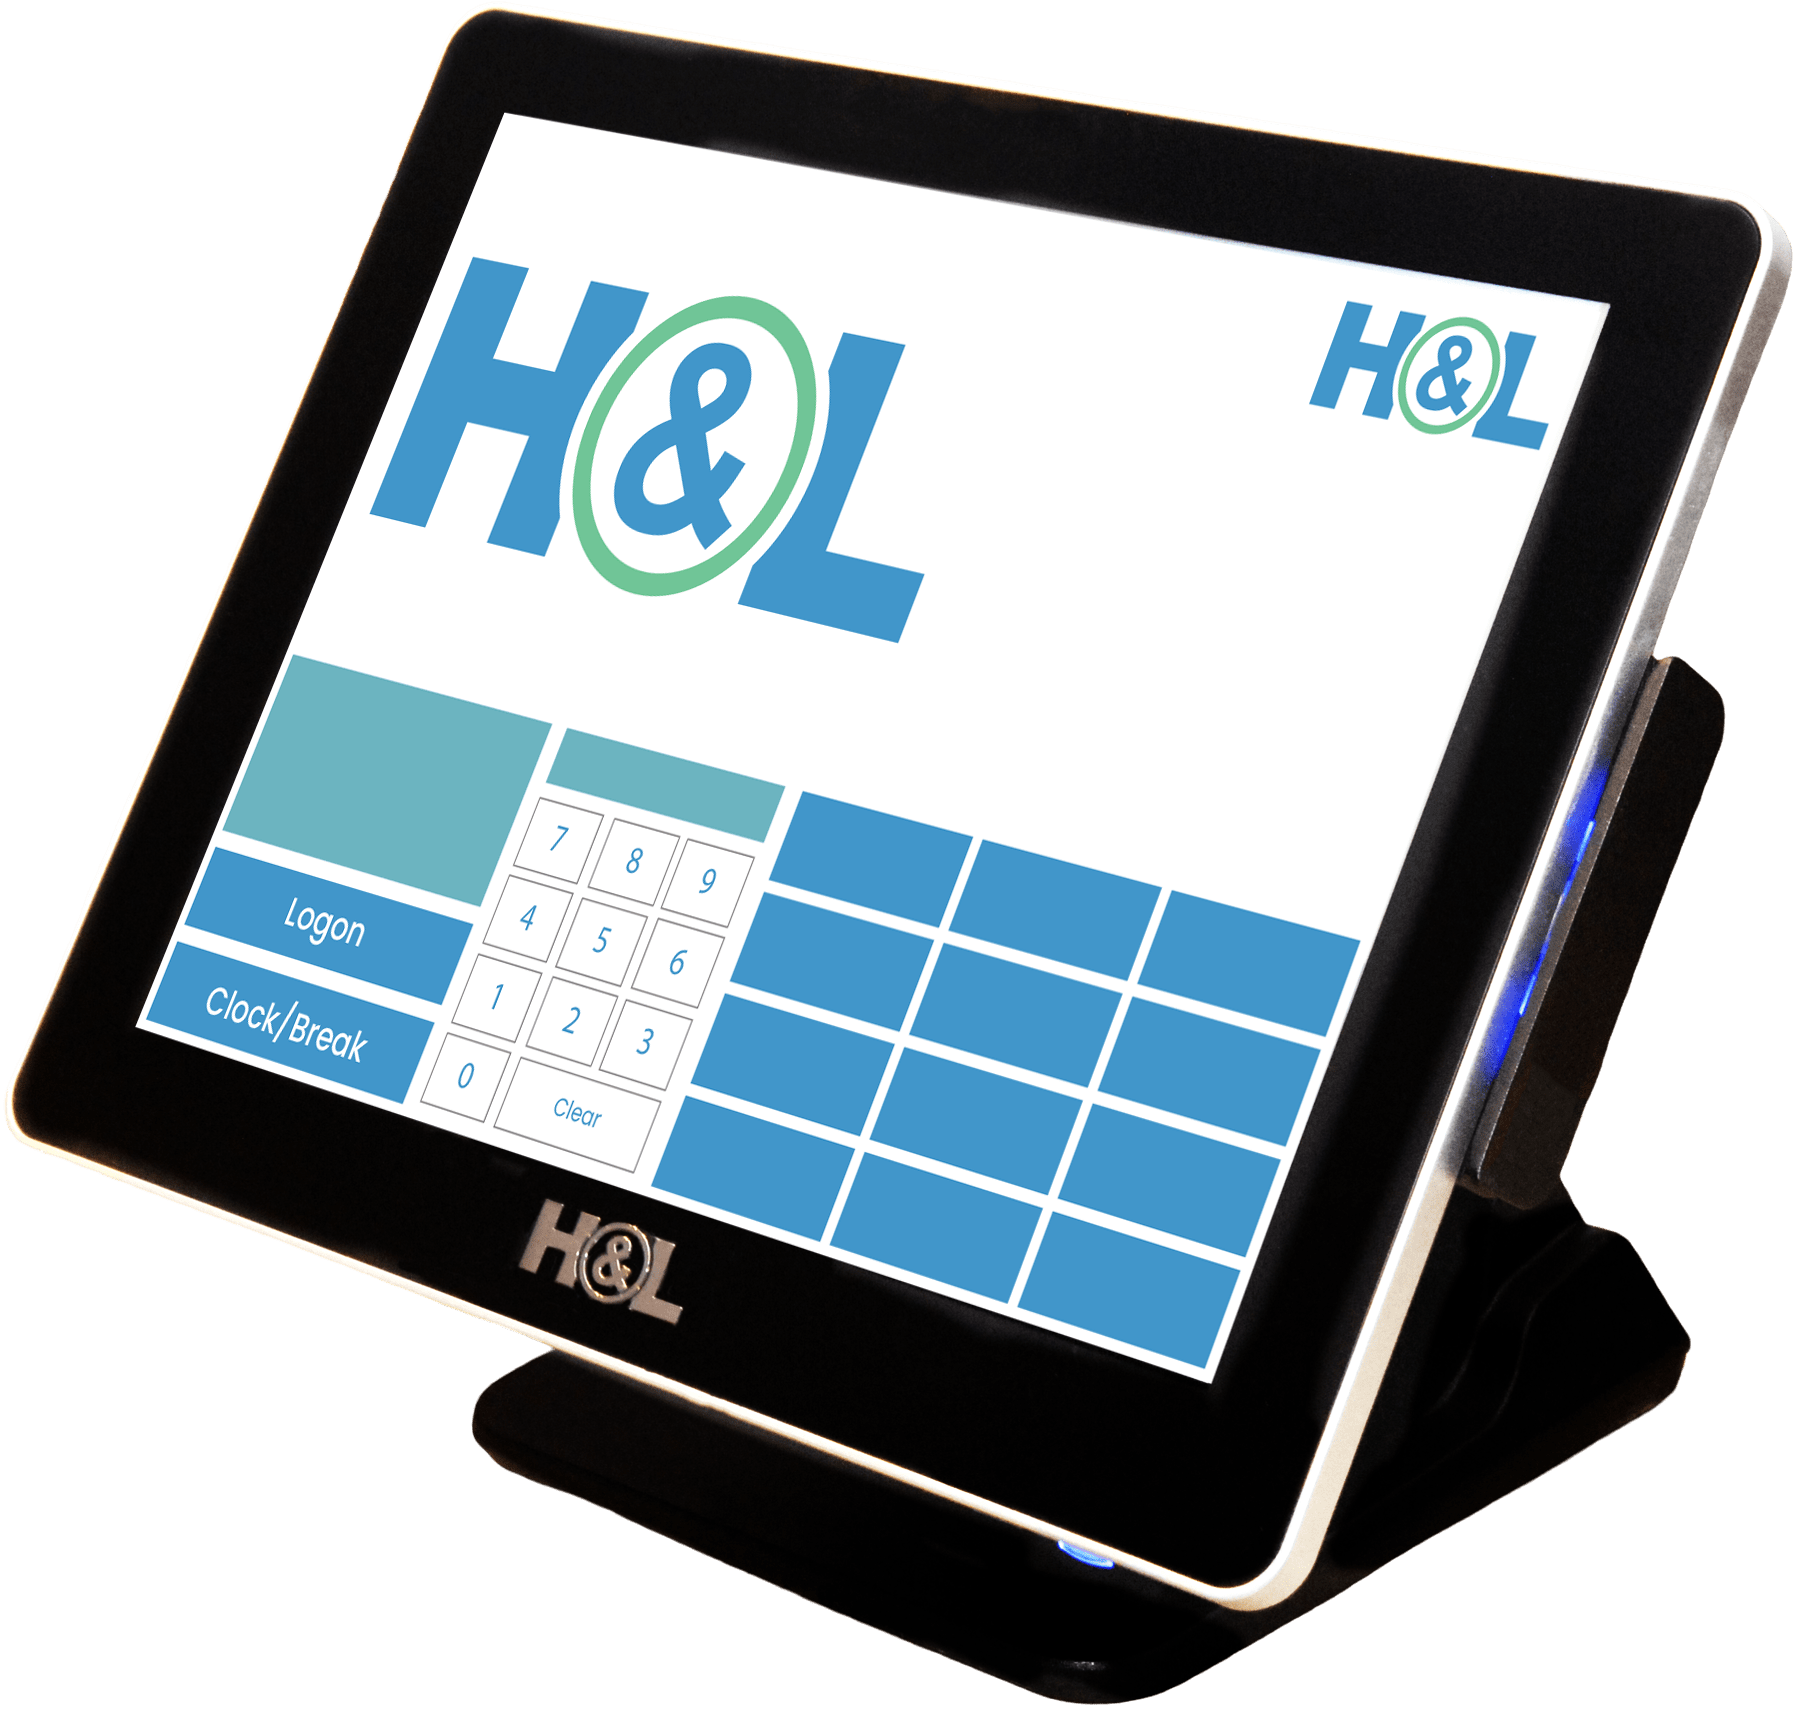 H&L POS tablet style Point of Sale system